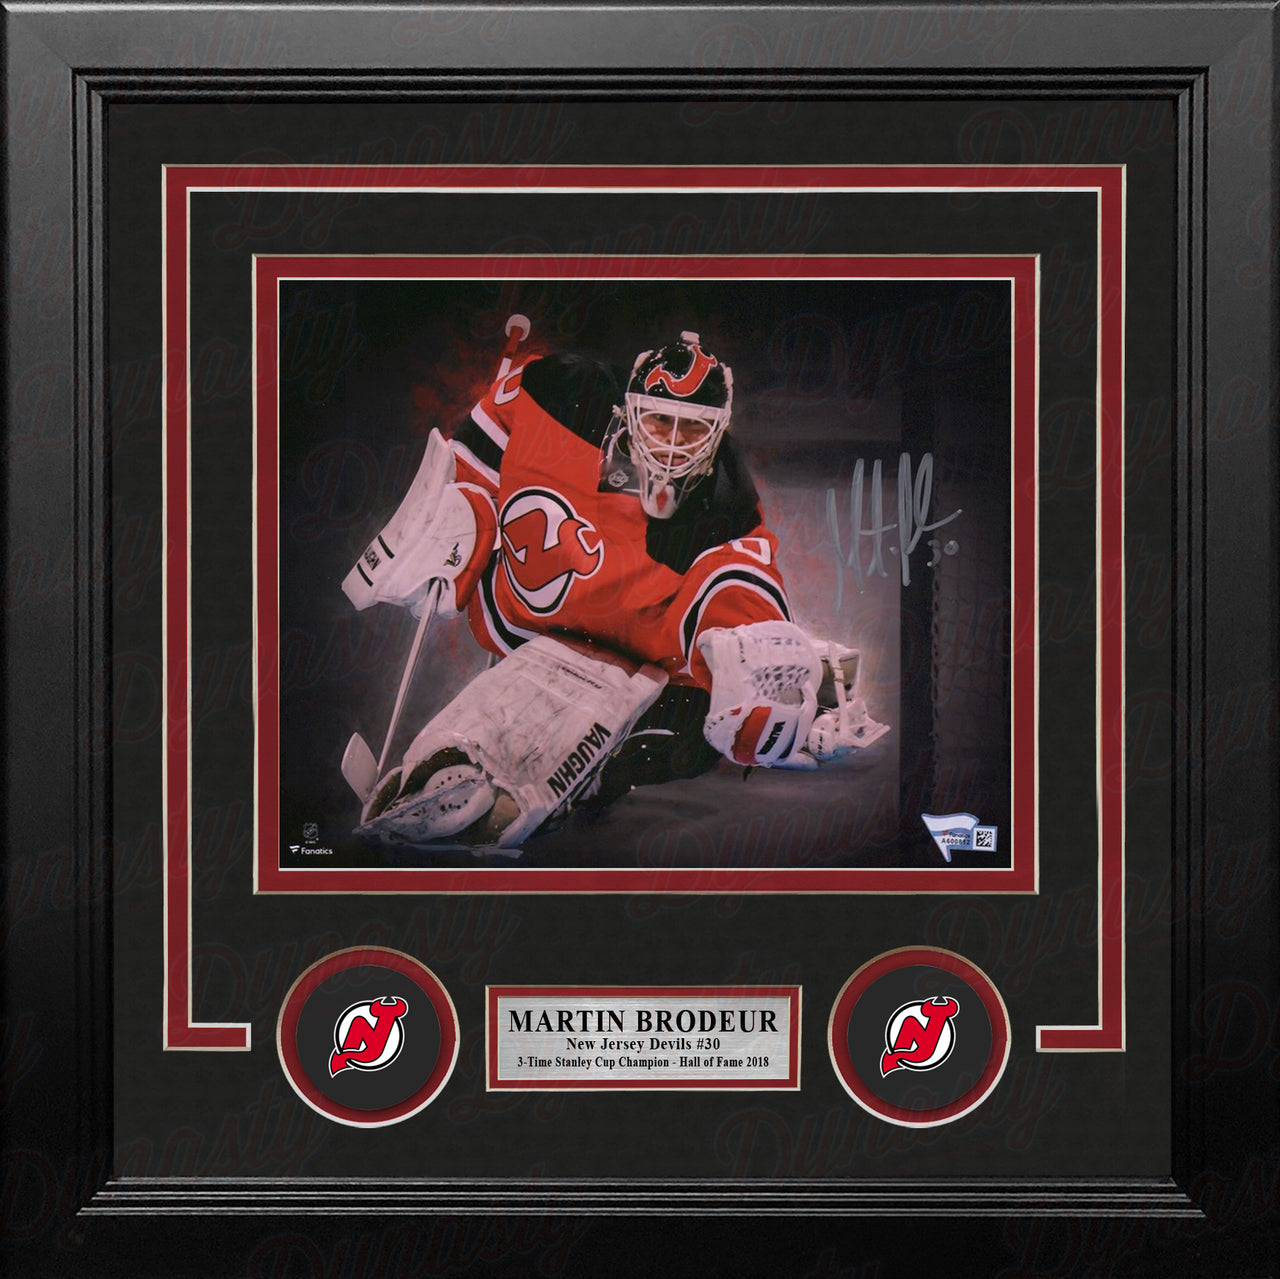 Alex Ovechkin 800th Goal Washington Capitals Autographed 11x14 Framed Photo  Numbered to 800